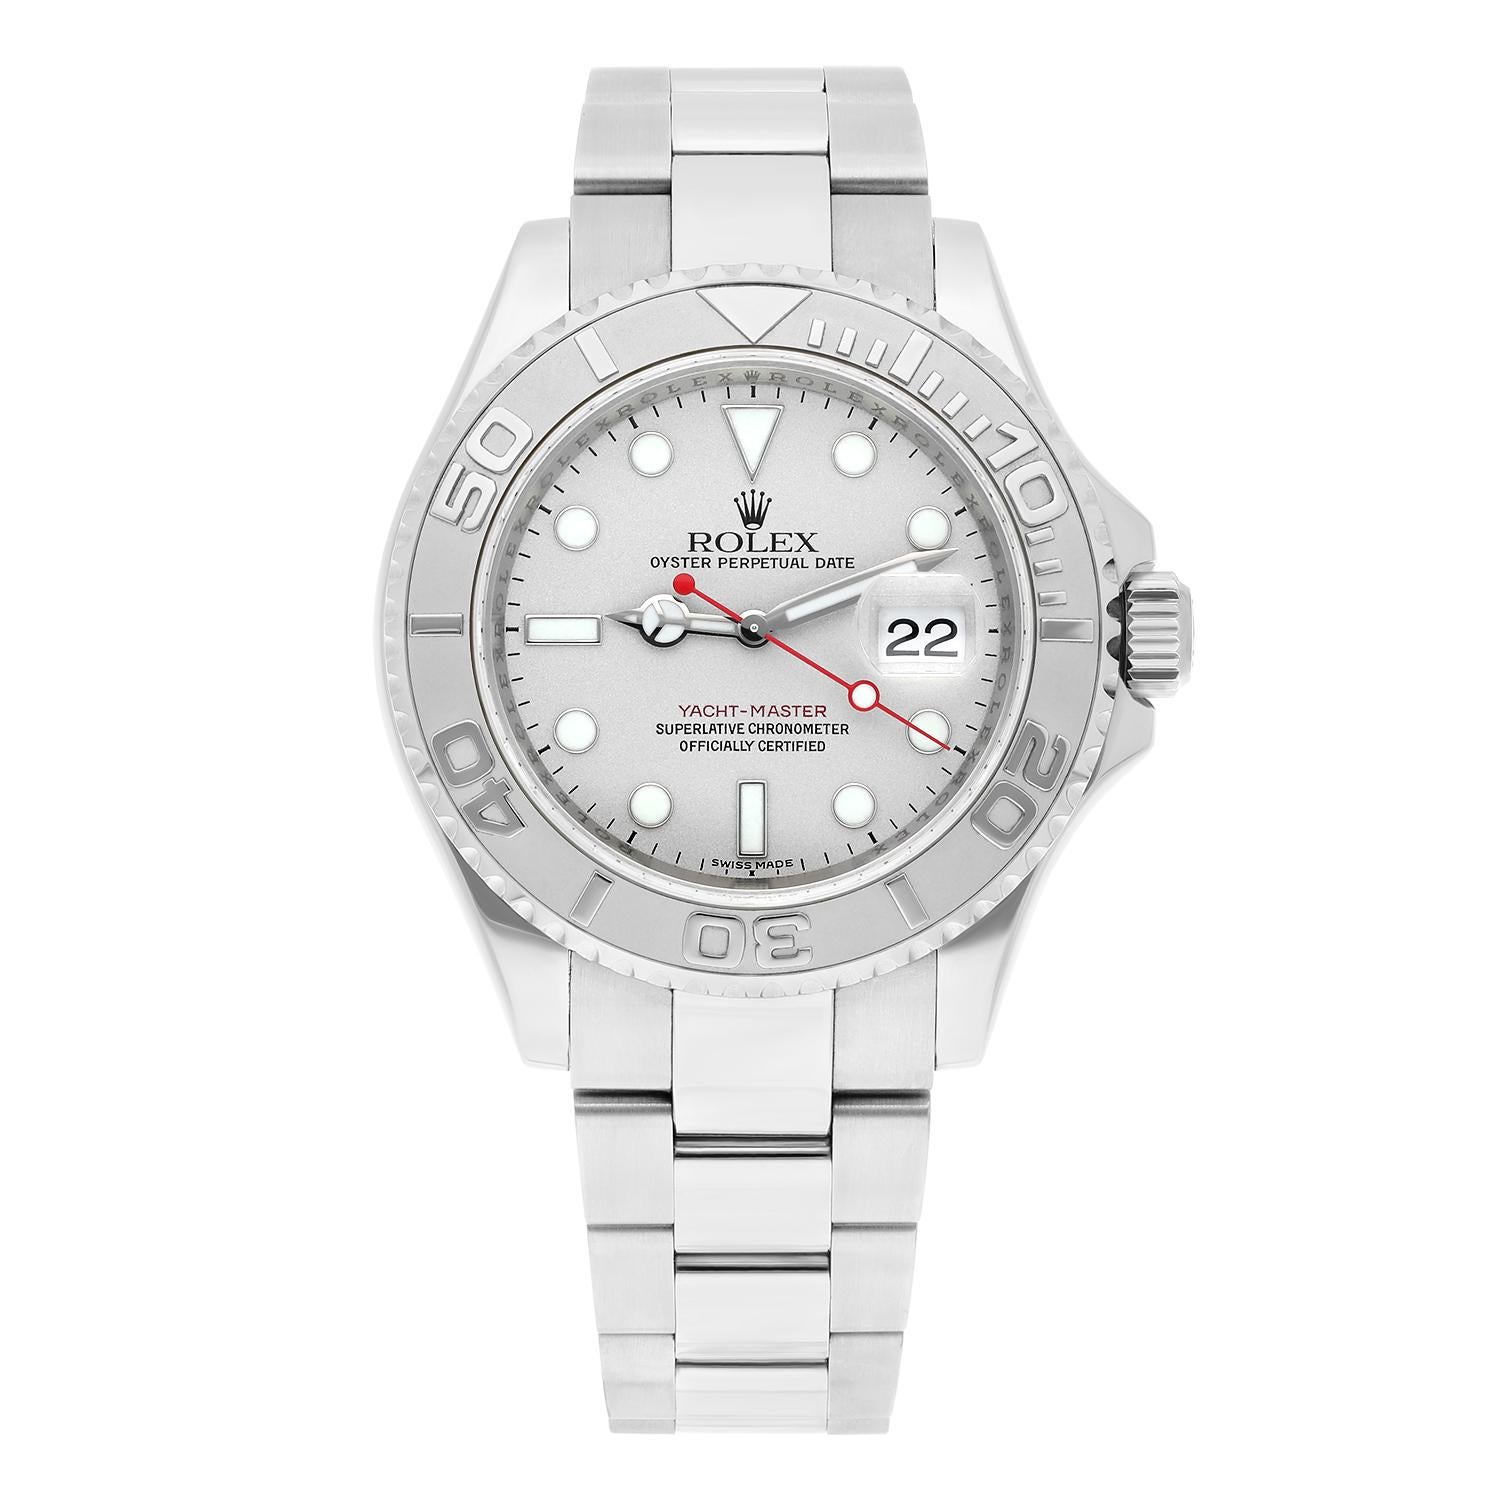 This Rolex Yacht-Master watch is a stunning masterpiece that is perfect for any occasion. It features a bidirectional rotating platinum bezel. The 40mm case is made of polished stainless steel and has a screwback case. The silver dial has a date